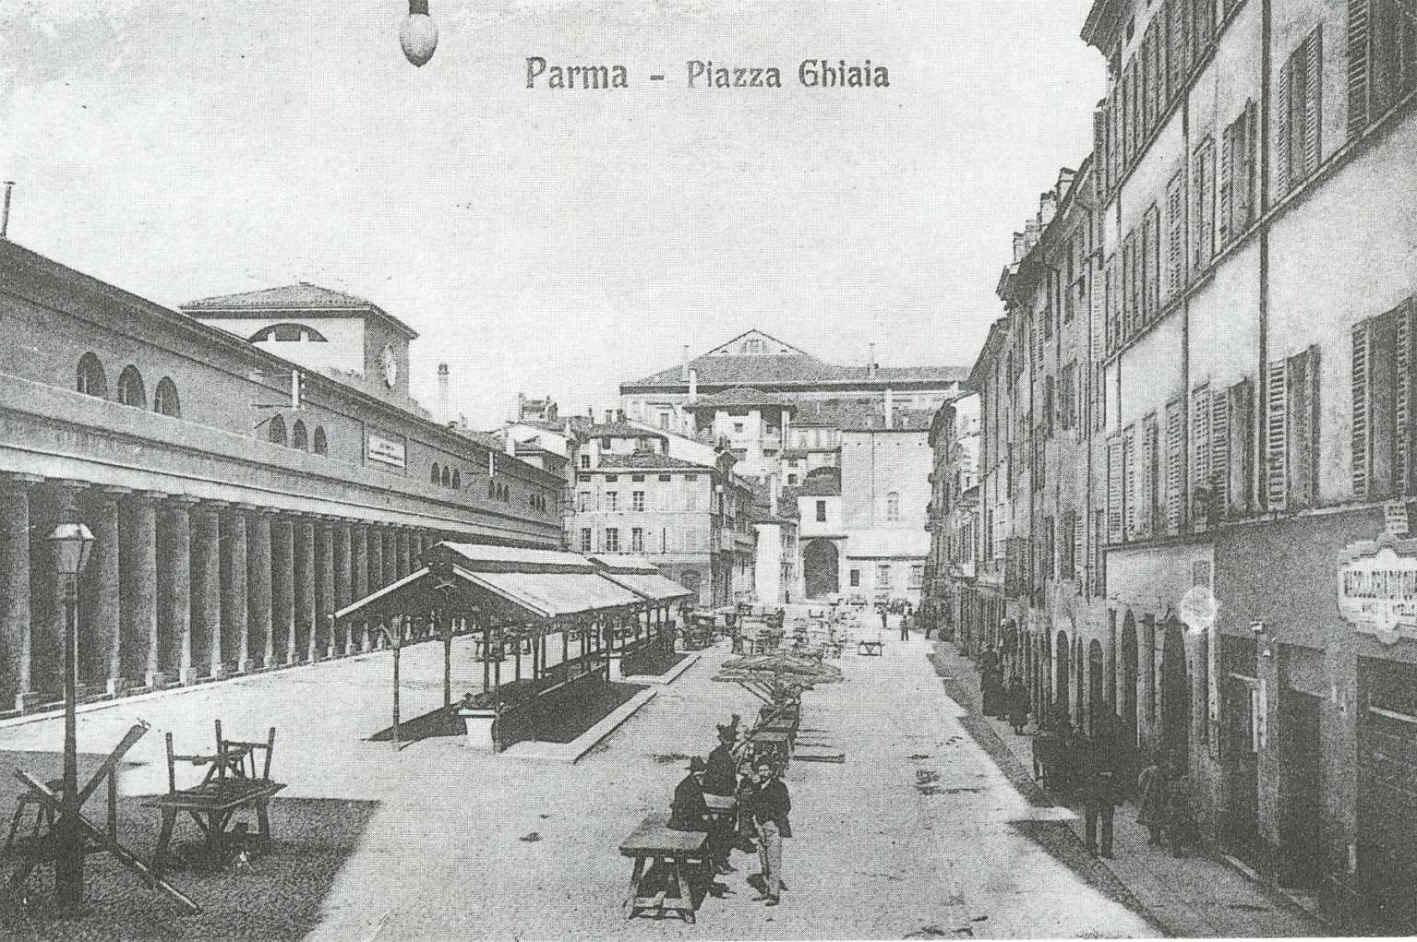 The history of Ghiaia Square in Parma